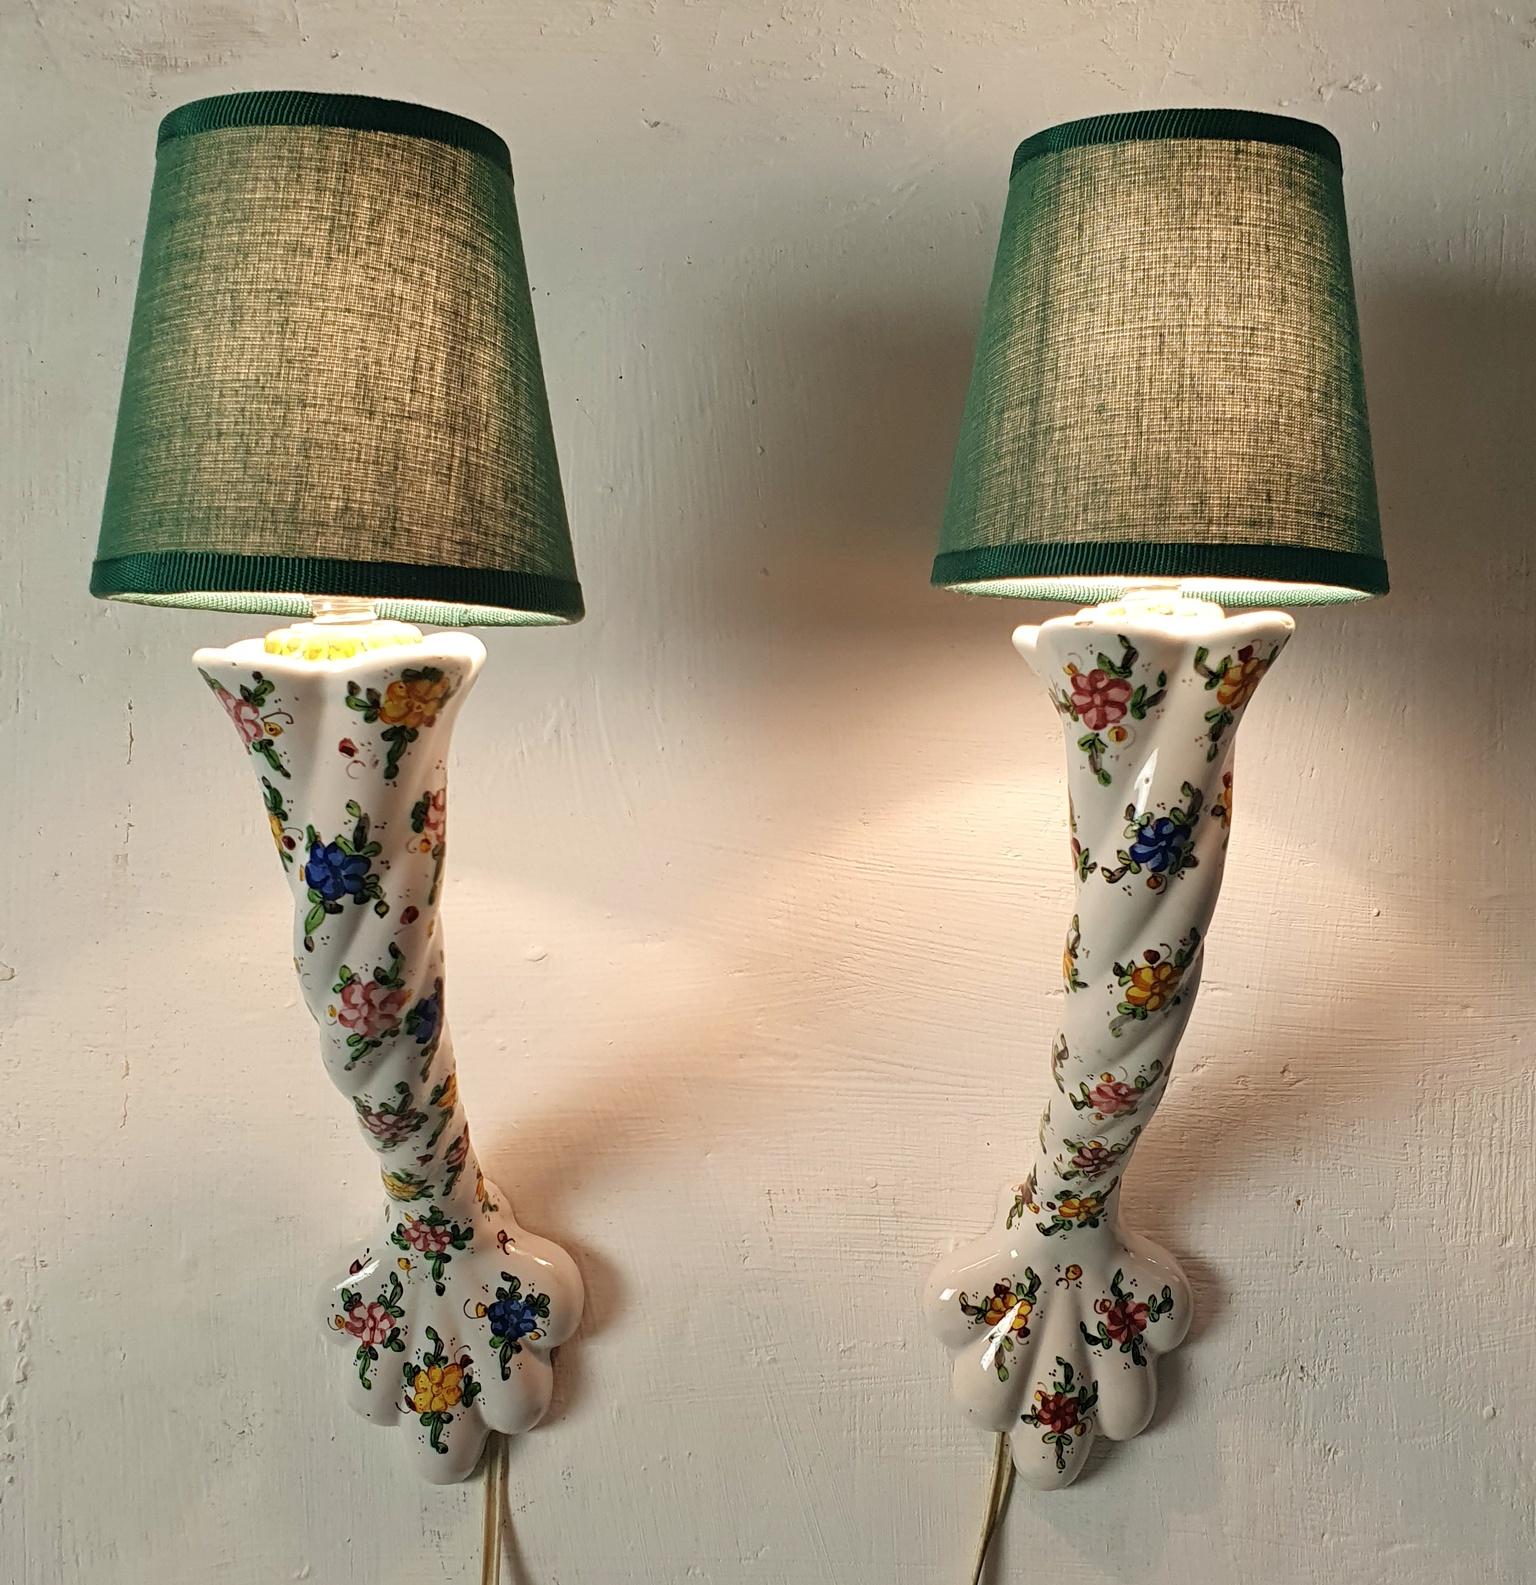 Beautiful pair of ceramic wall sconces made by Biagioli-Gubbio ceramics. Vasellari mastro CM. They are painted with floral motifs and made with scrolls and flowers and made to recall the Venetian style of 18th century flowers in a provincial rococo